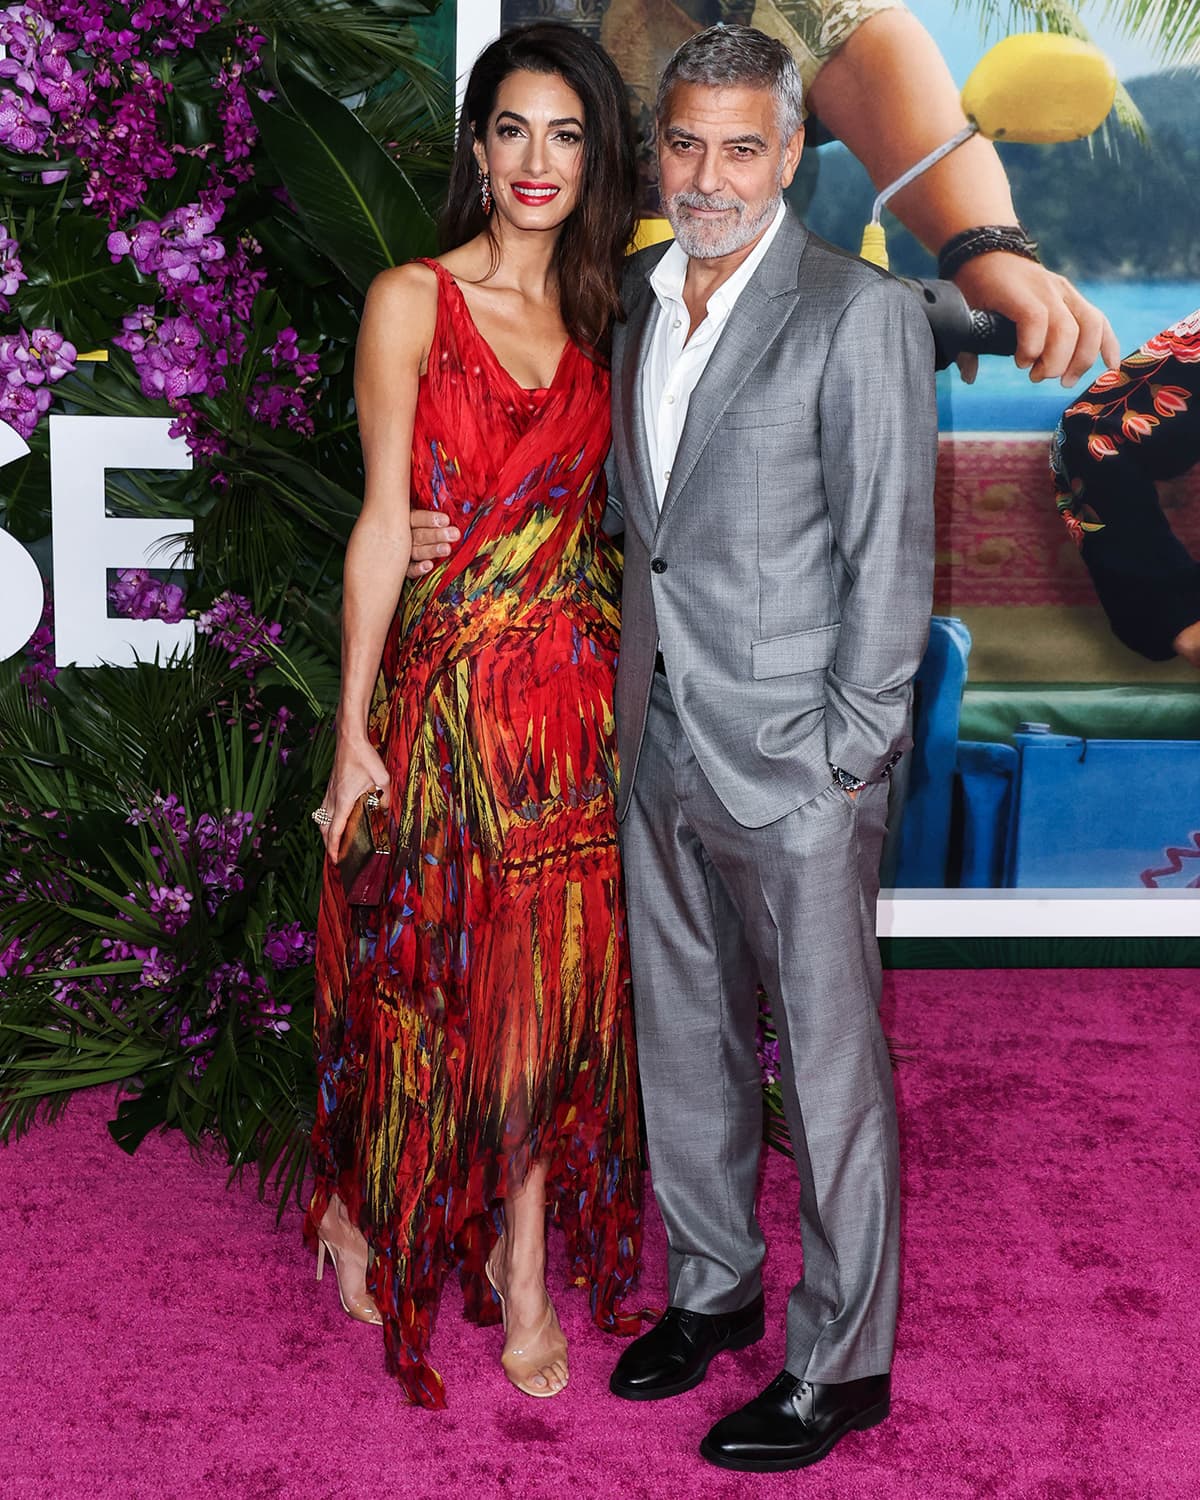 Amal Clooney accompanies her husband George Clooney to the premiere of his latest rom-com movie